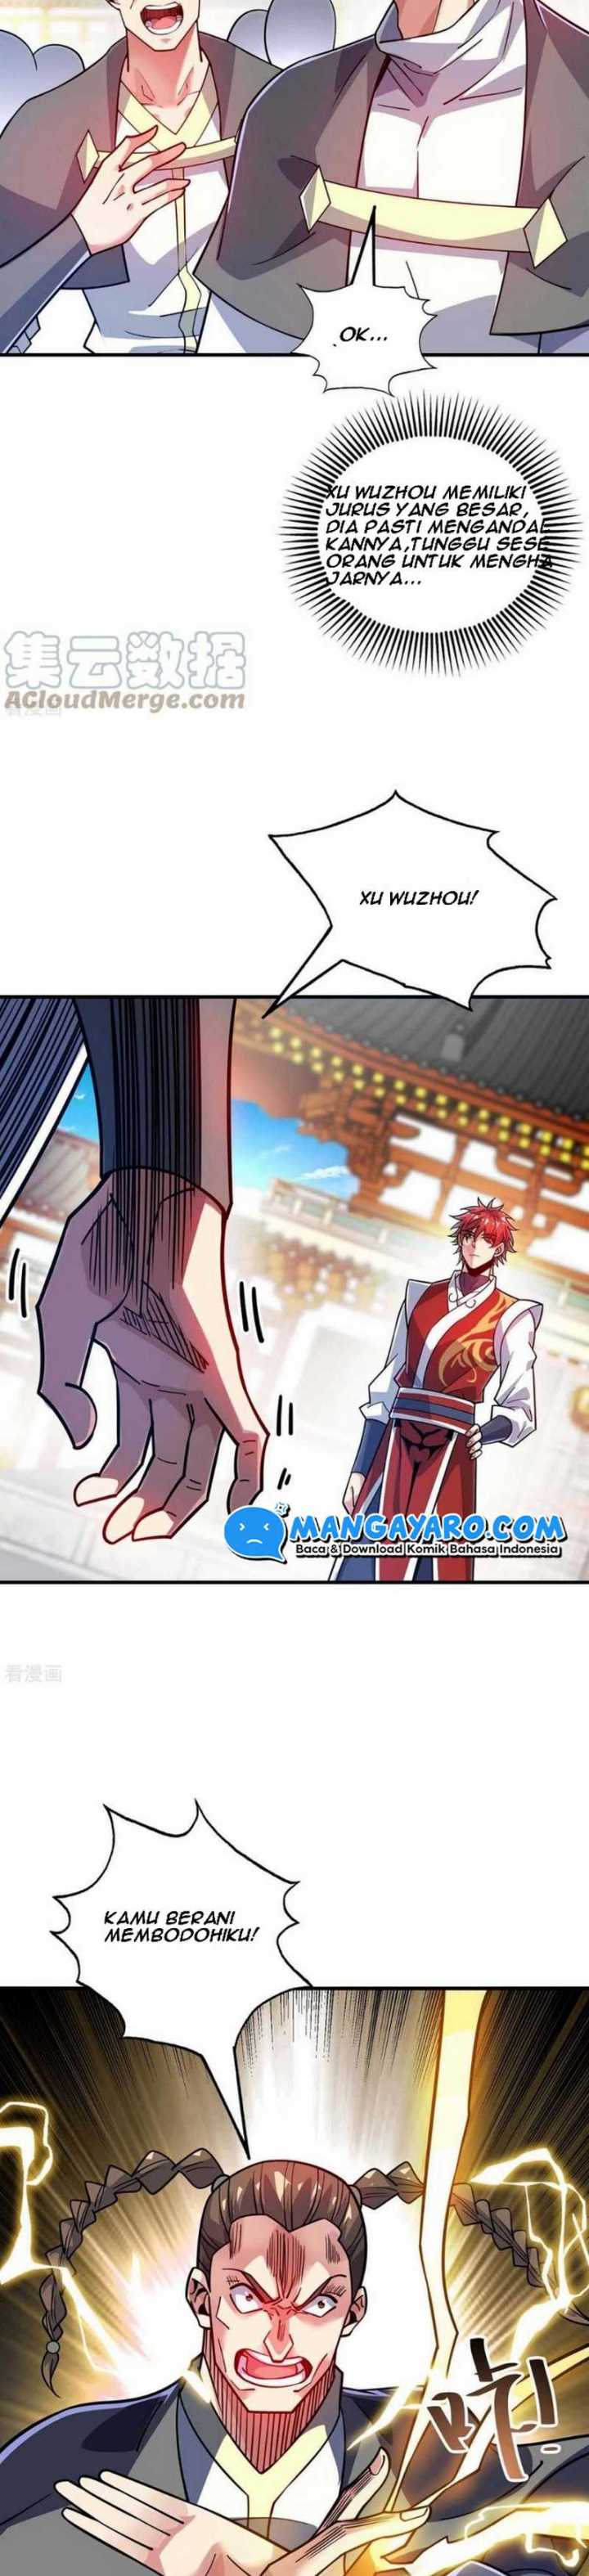 The First Son-In-Law Vanguard of All Time Chapter 173